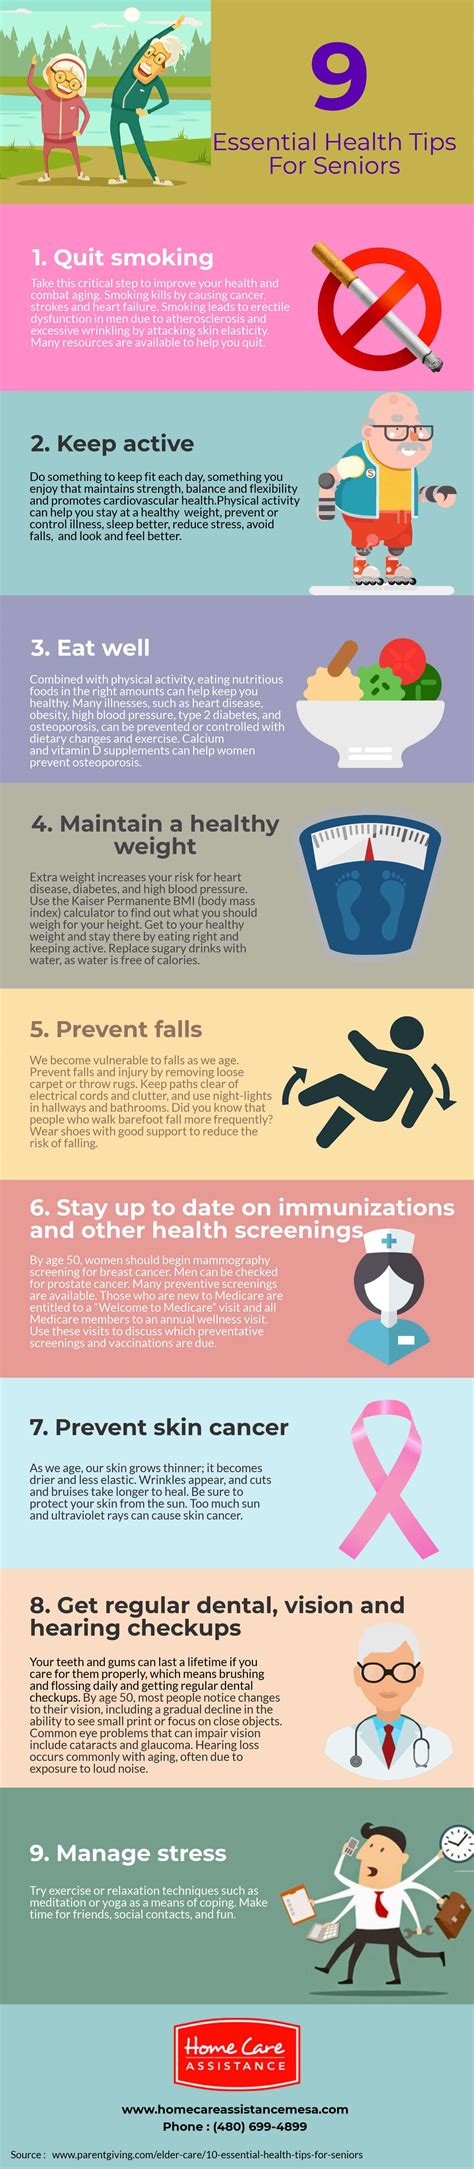 9-essential-health-tips-for-seniors-infographic